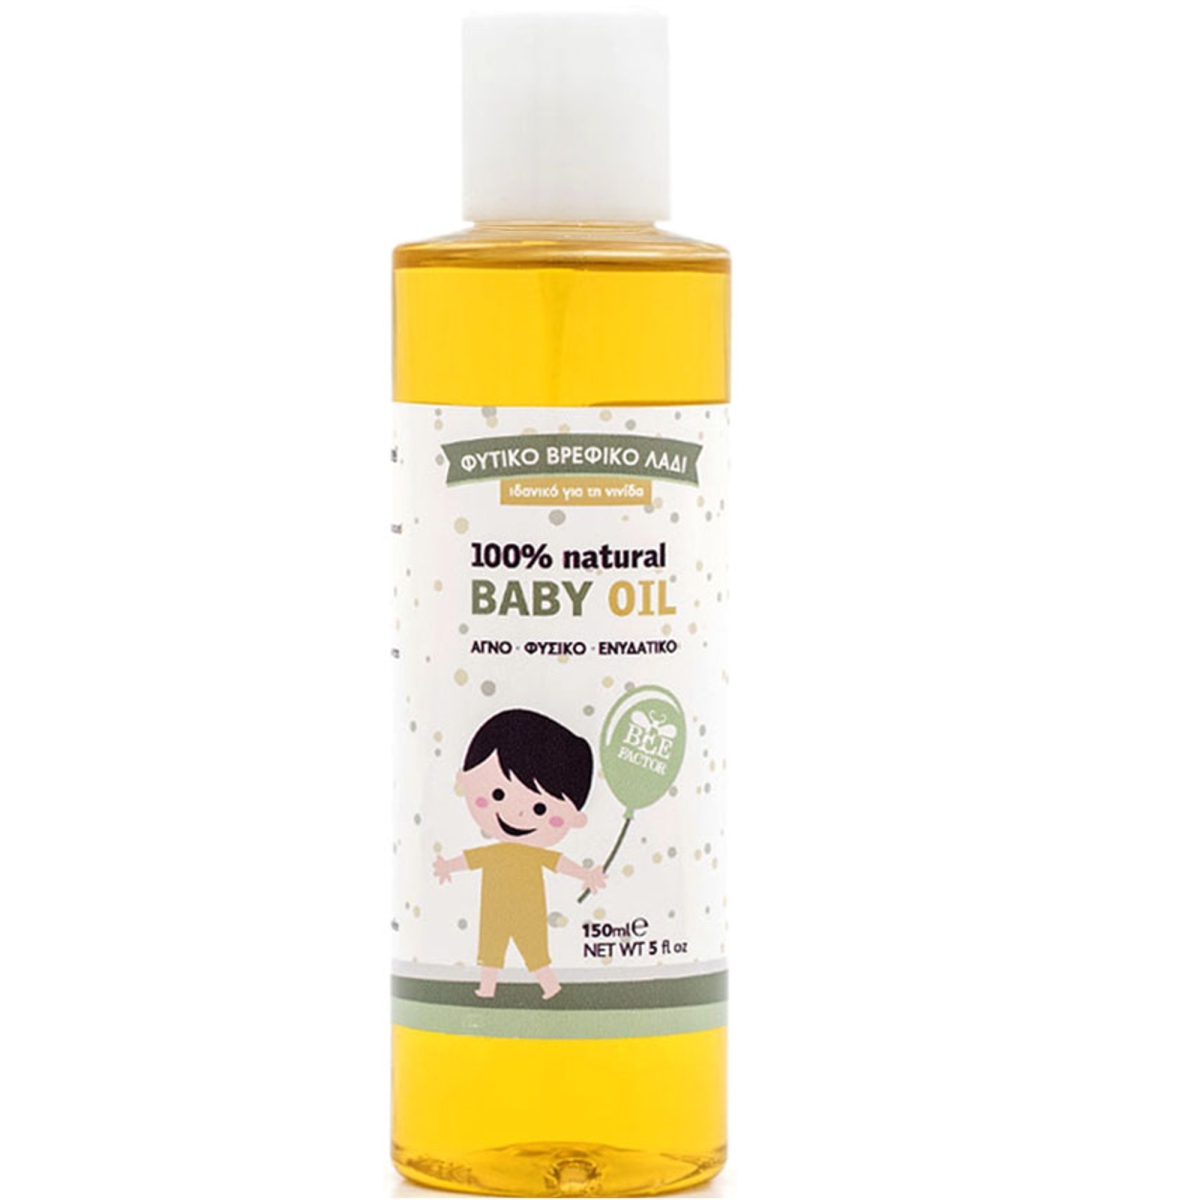 Herbal Baby Oil for the Body and Bady Cradle Cap "Baby Boy" (150 ml)